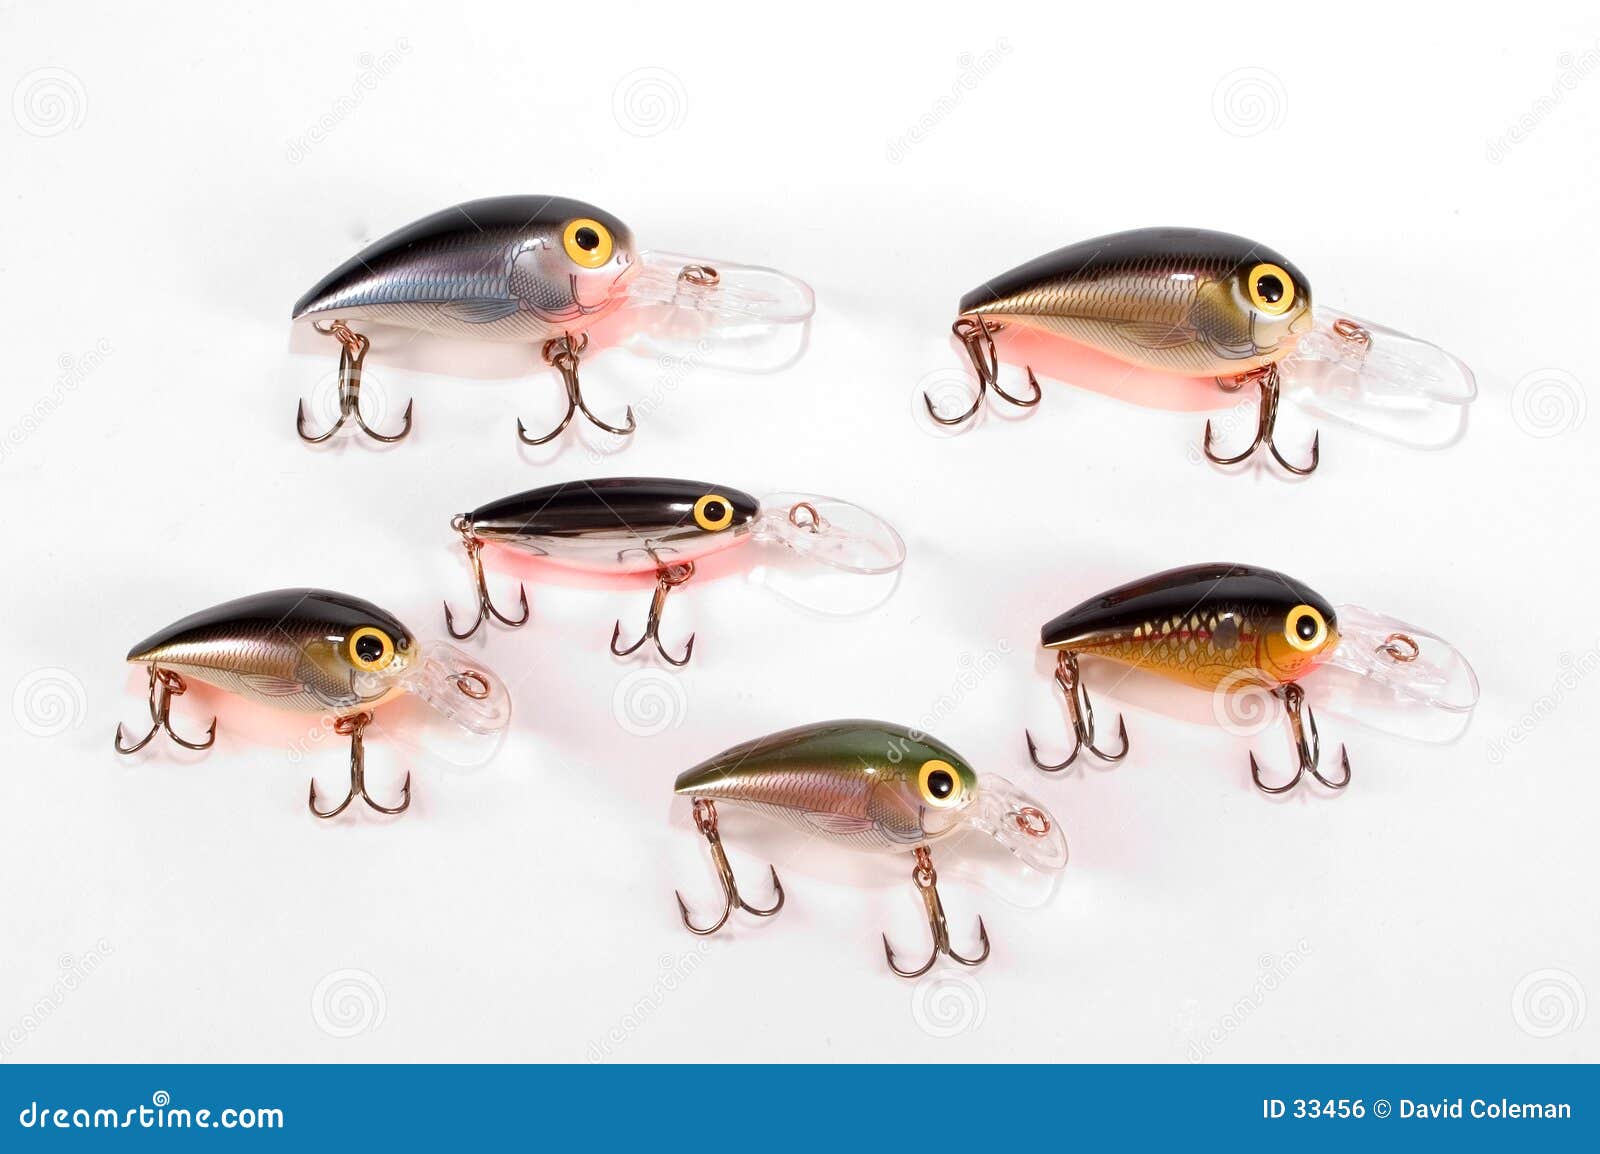 Crank Baits stock photo. Image of lures, minnows, artificial - 33456